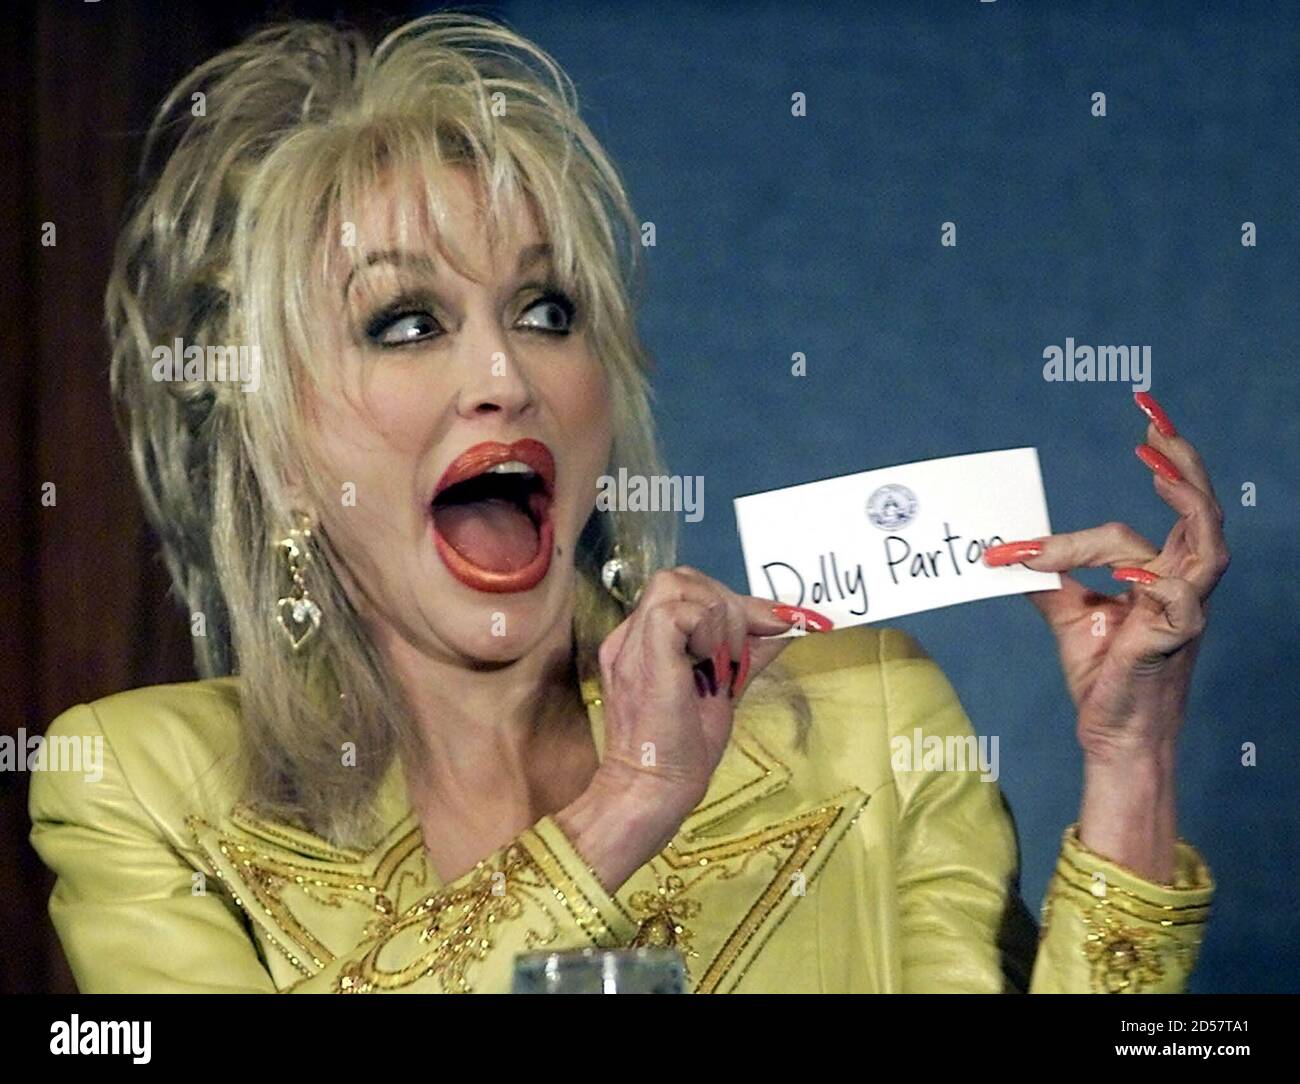 Country Music star Dolly Parton jokes with members of the National Press  Club prior to her remarks March 23. Parton appeared at the press club to  help promote her literacy advocacy group,